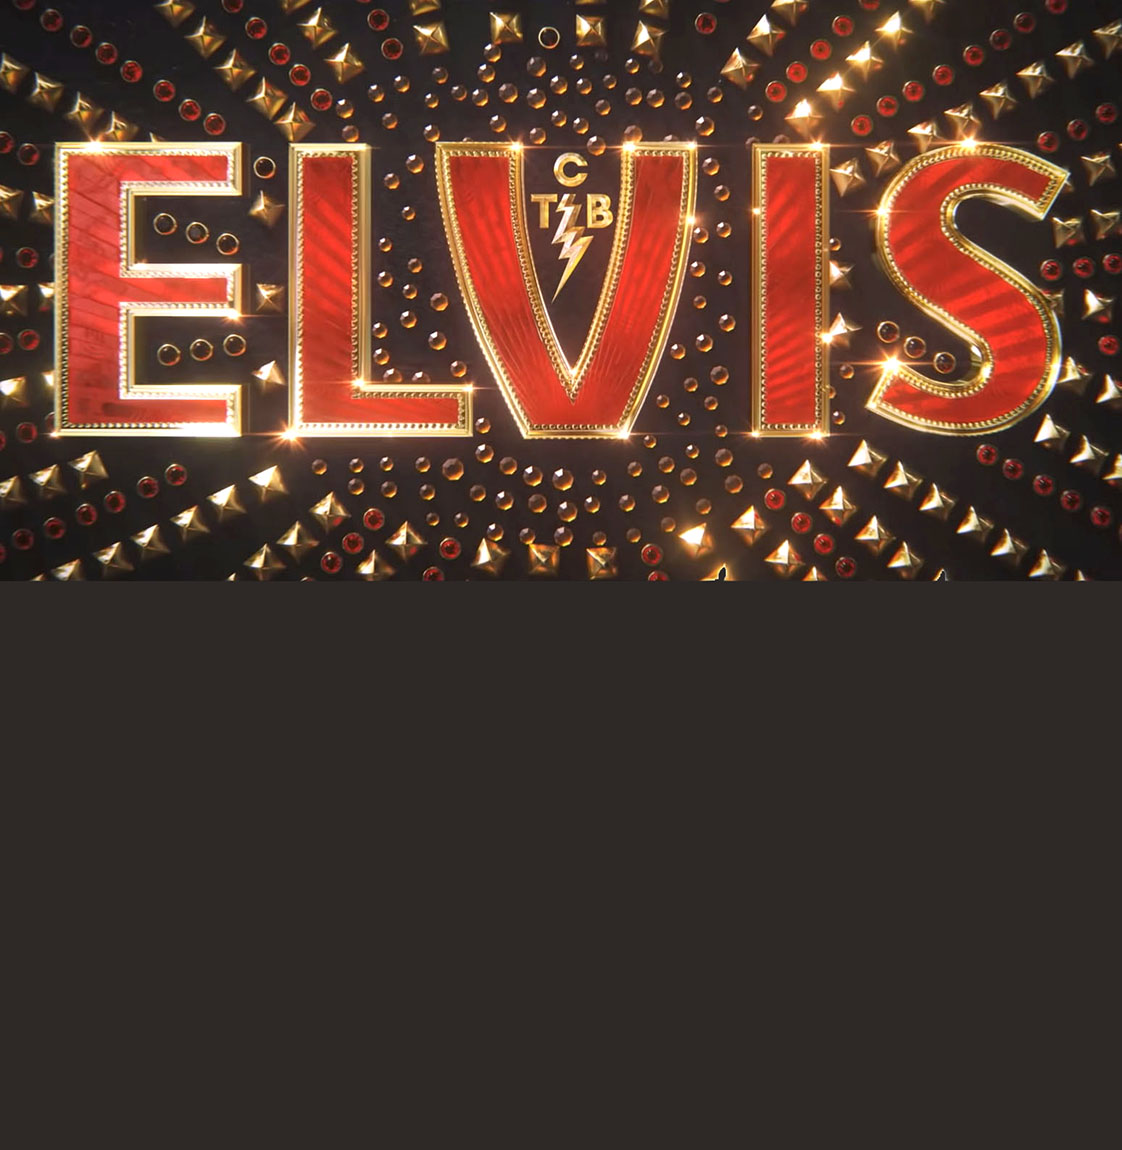 ELVIS the Movie - comes to Adelaide